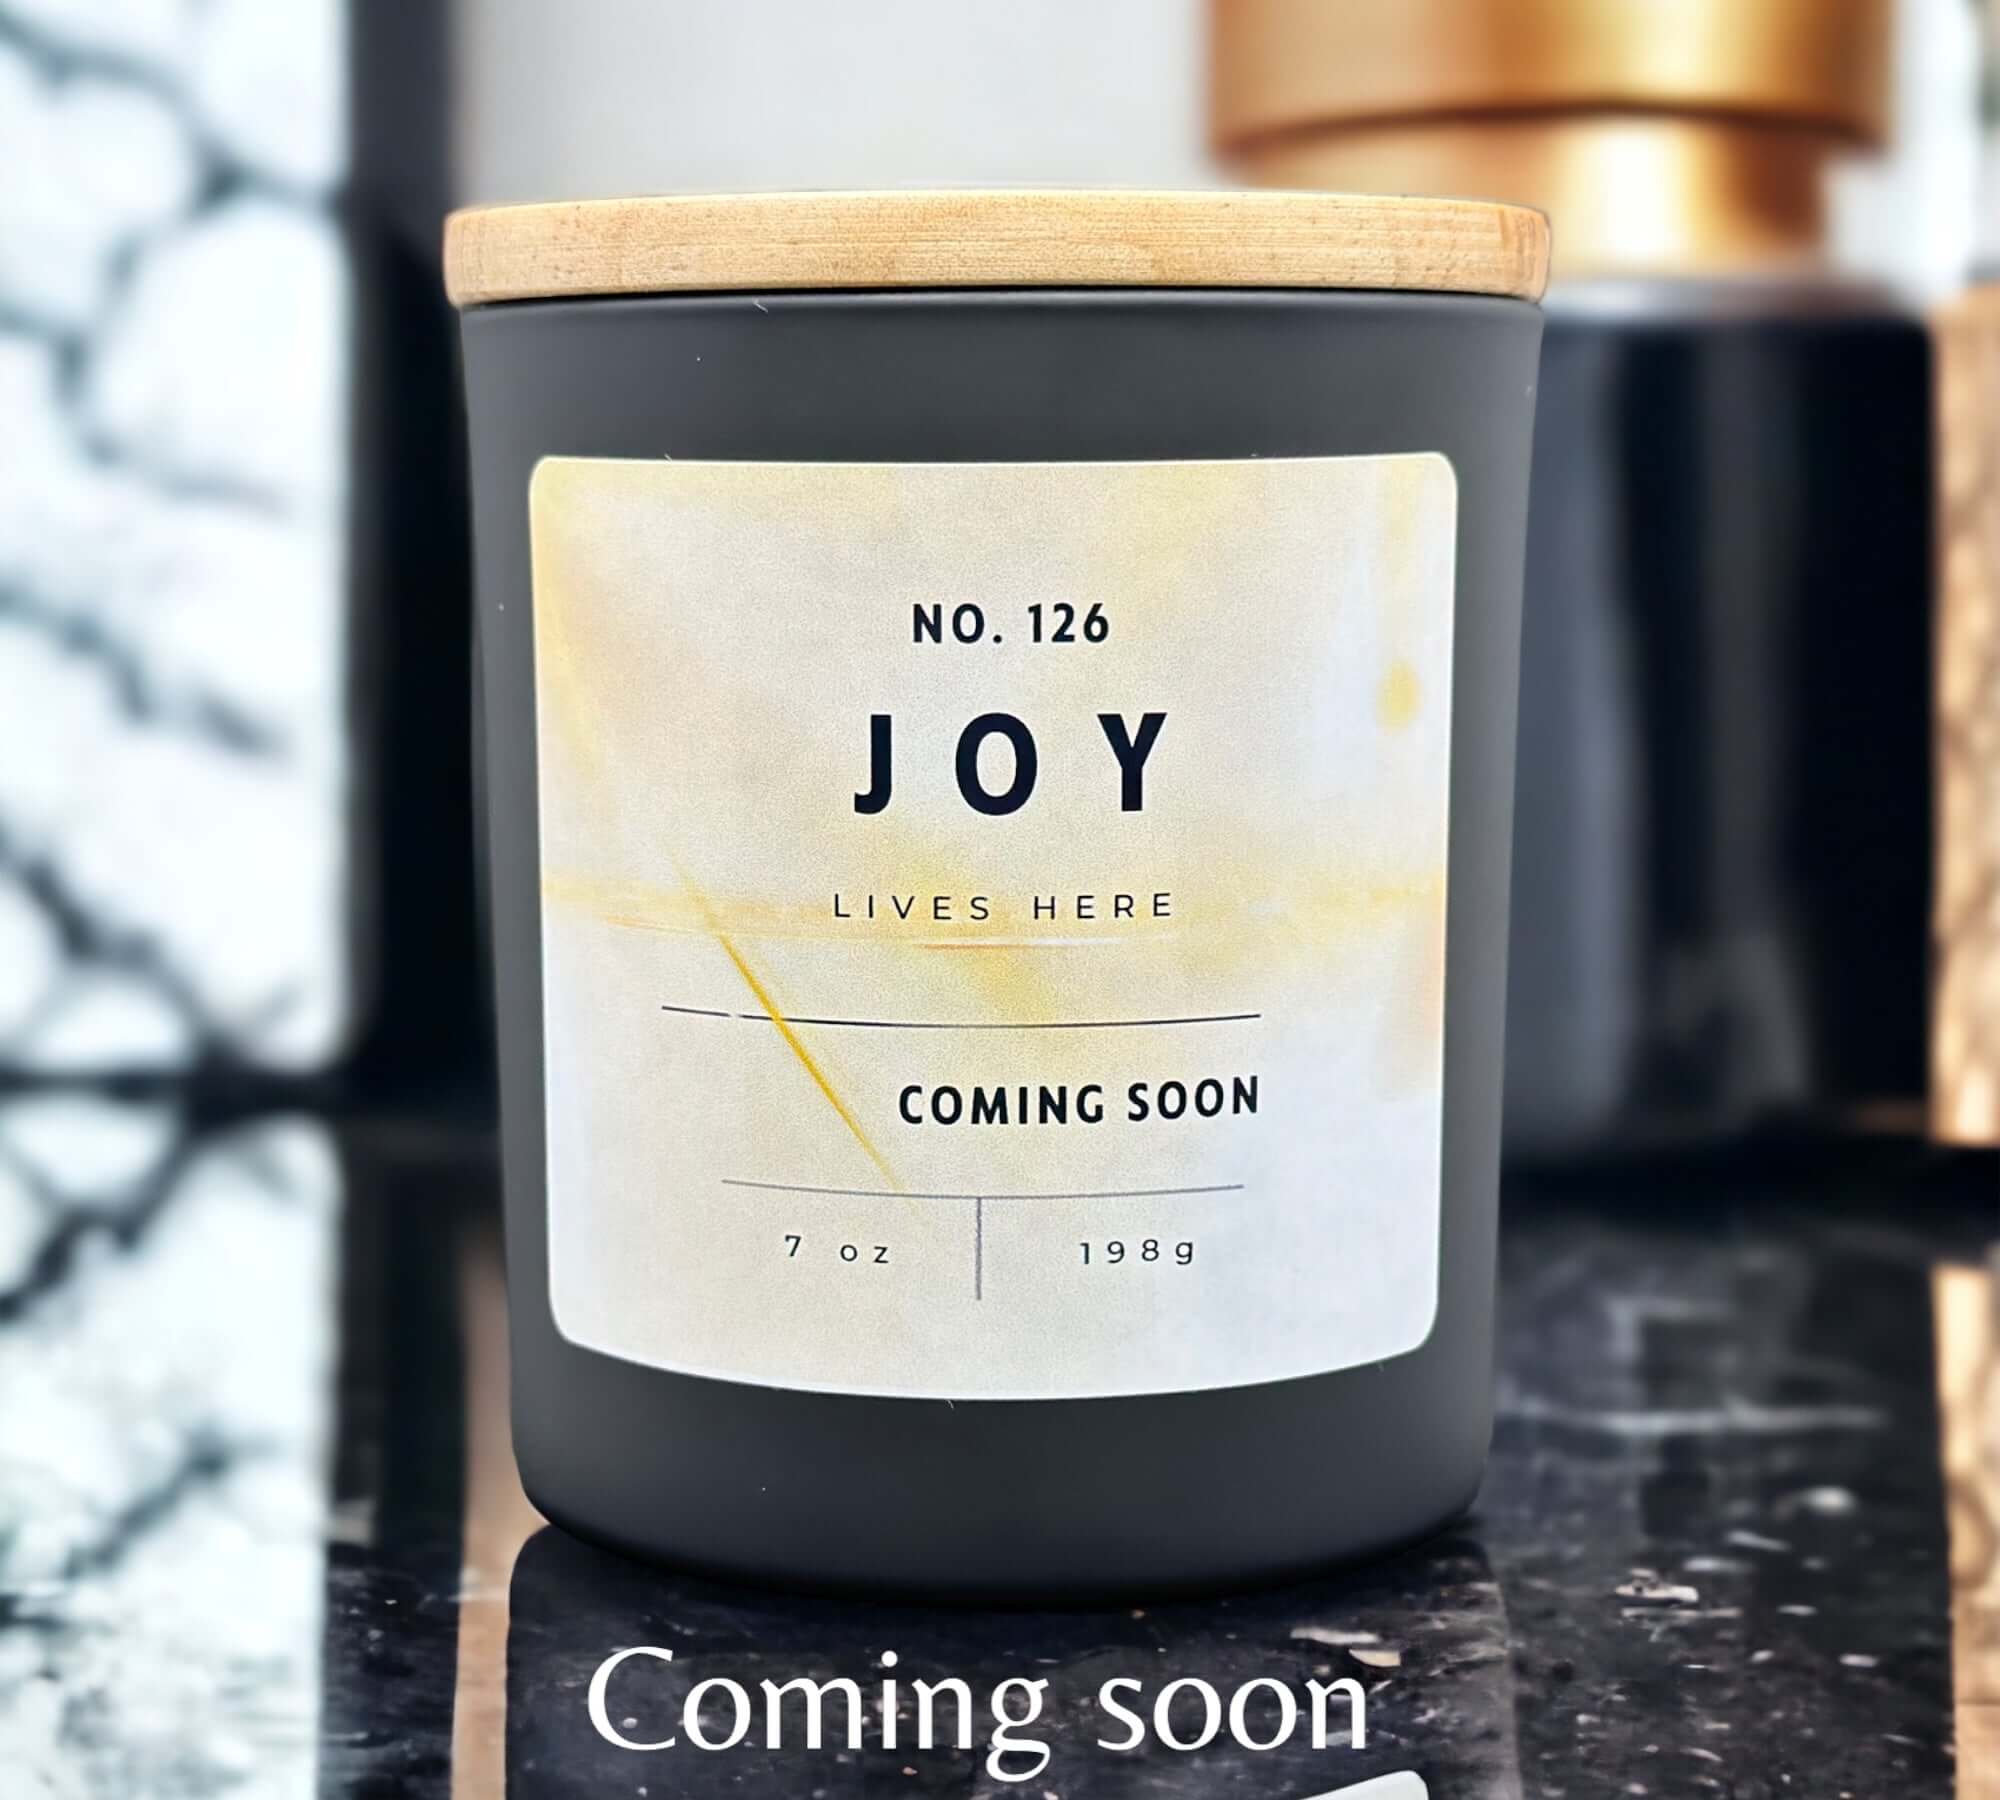 Joy lives here | Scented candle